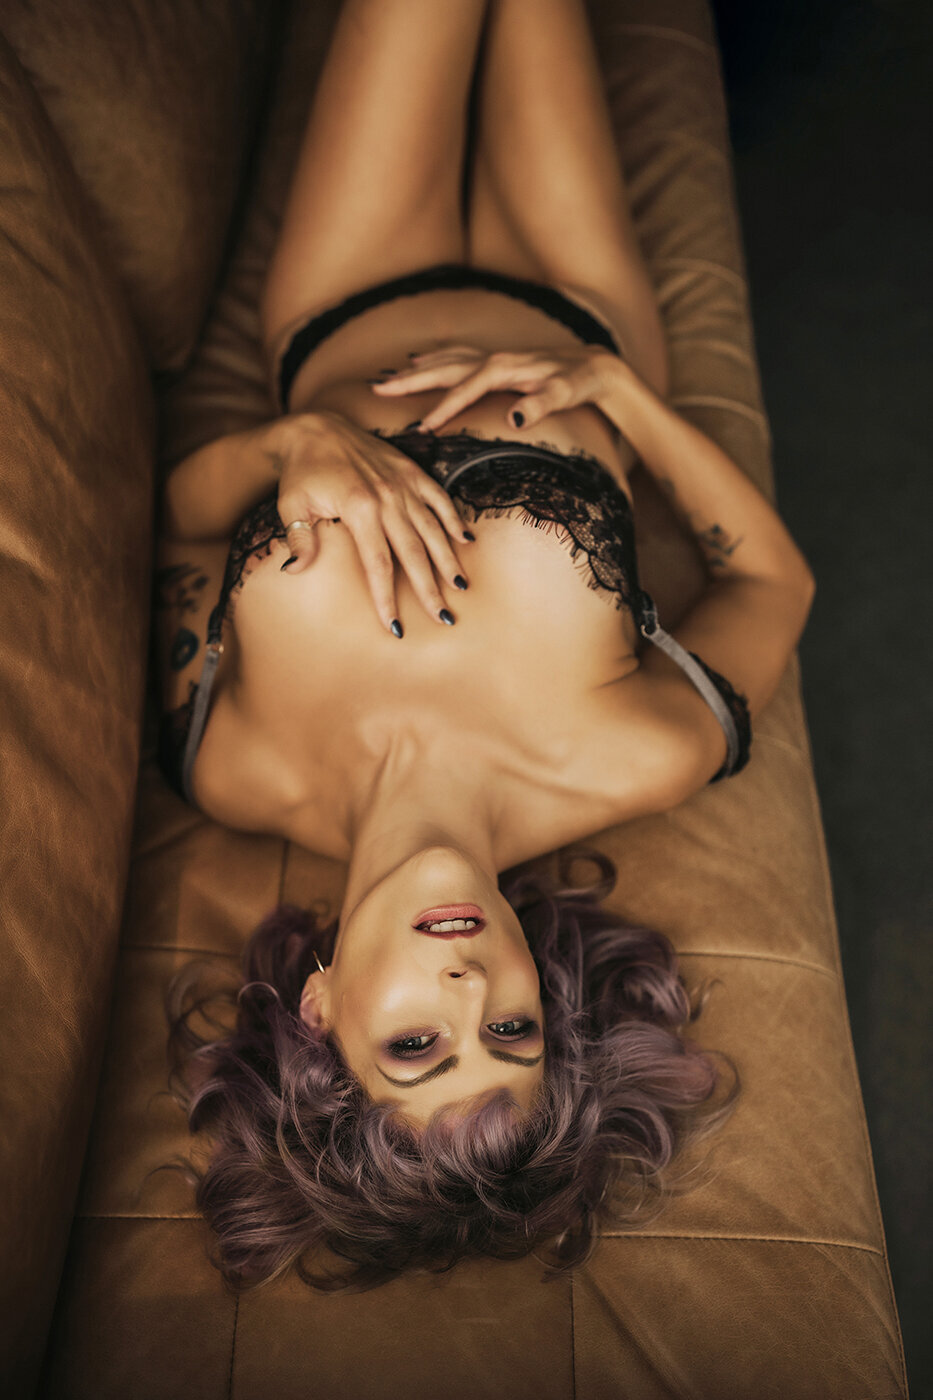 woman with purple hair lying on couch doing boudoir posing